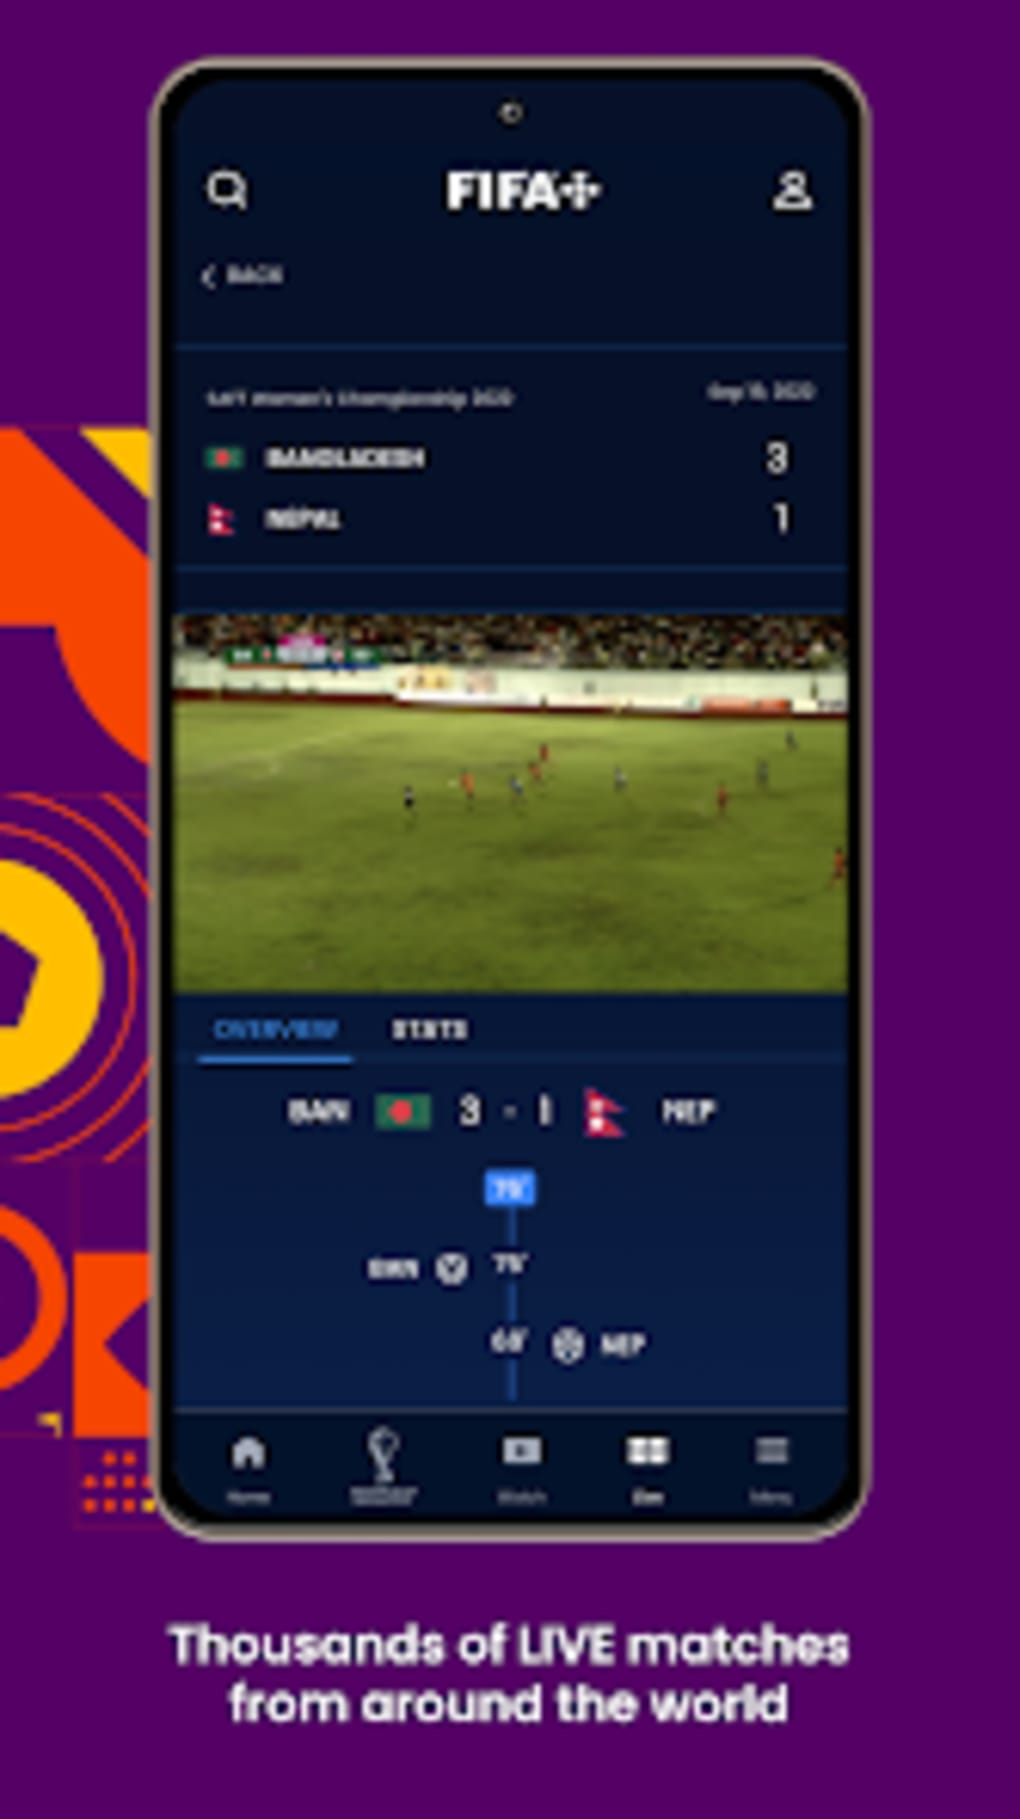 FIFA+  Football entertainment APK (Android App) - Free Download